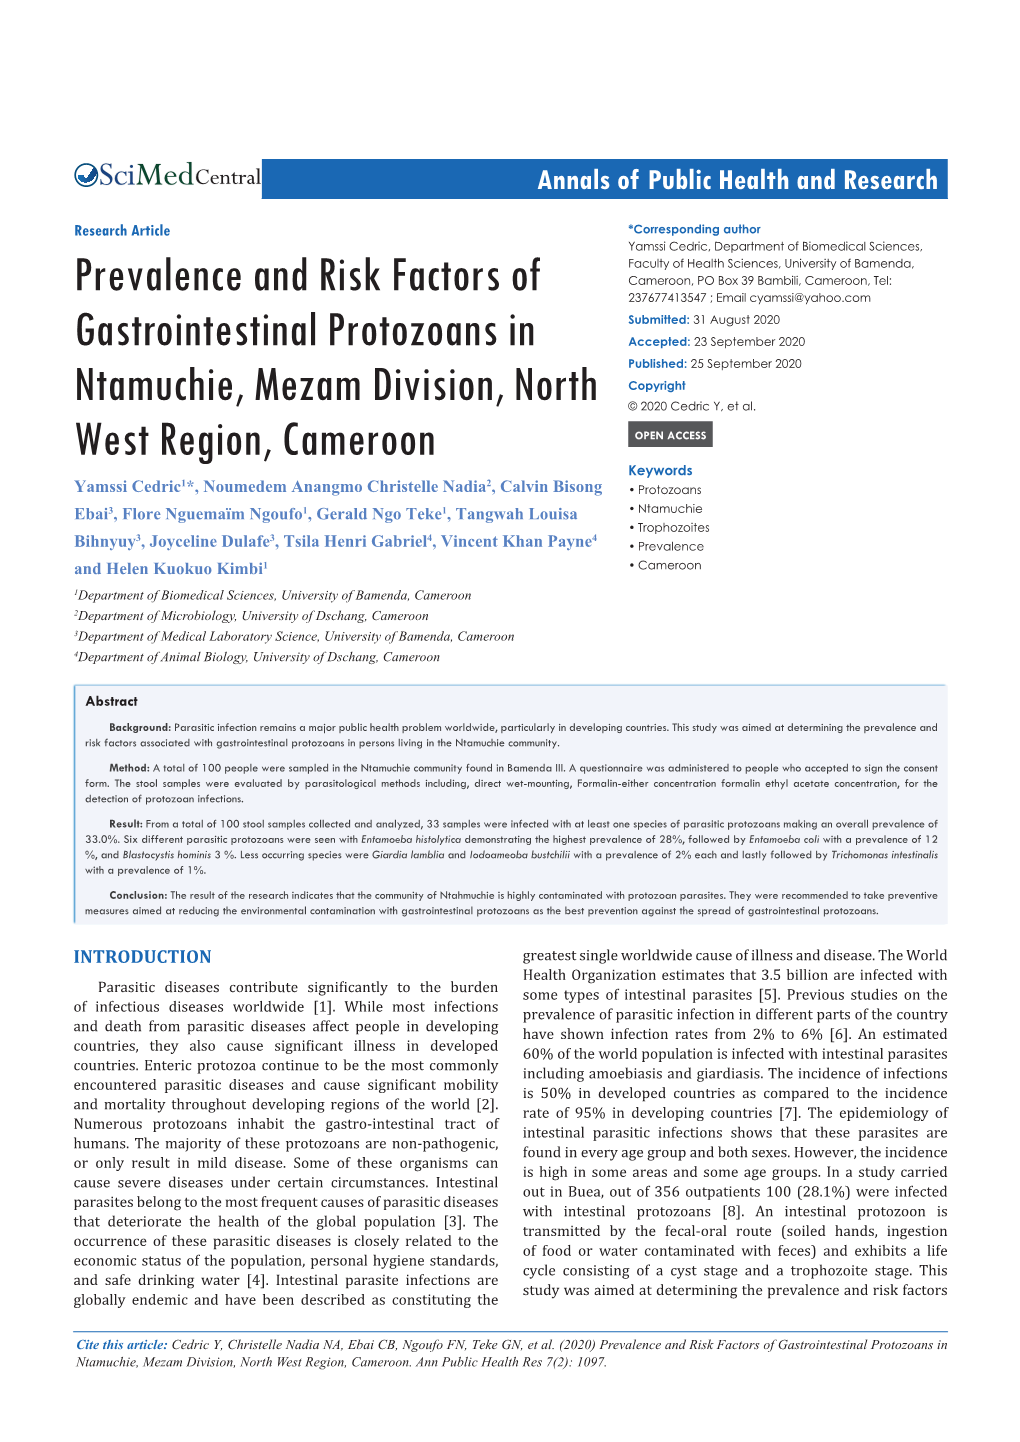 Prevalence and Risk Factors of Gastrointestinal Protozoans in Ntamuchie, Mezam Division, North West Region, Cameroon